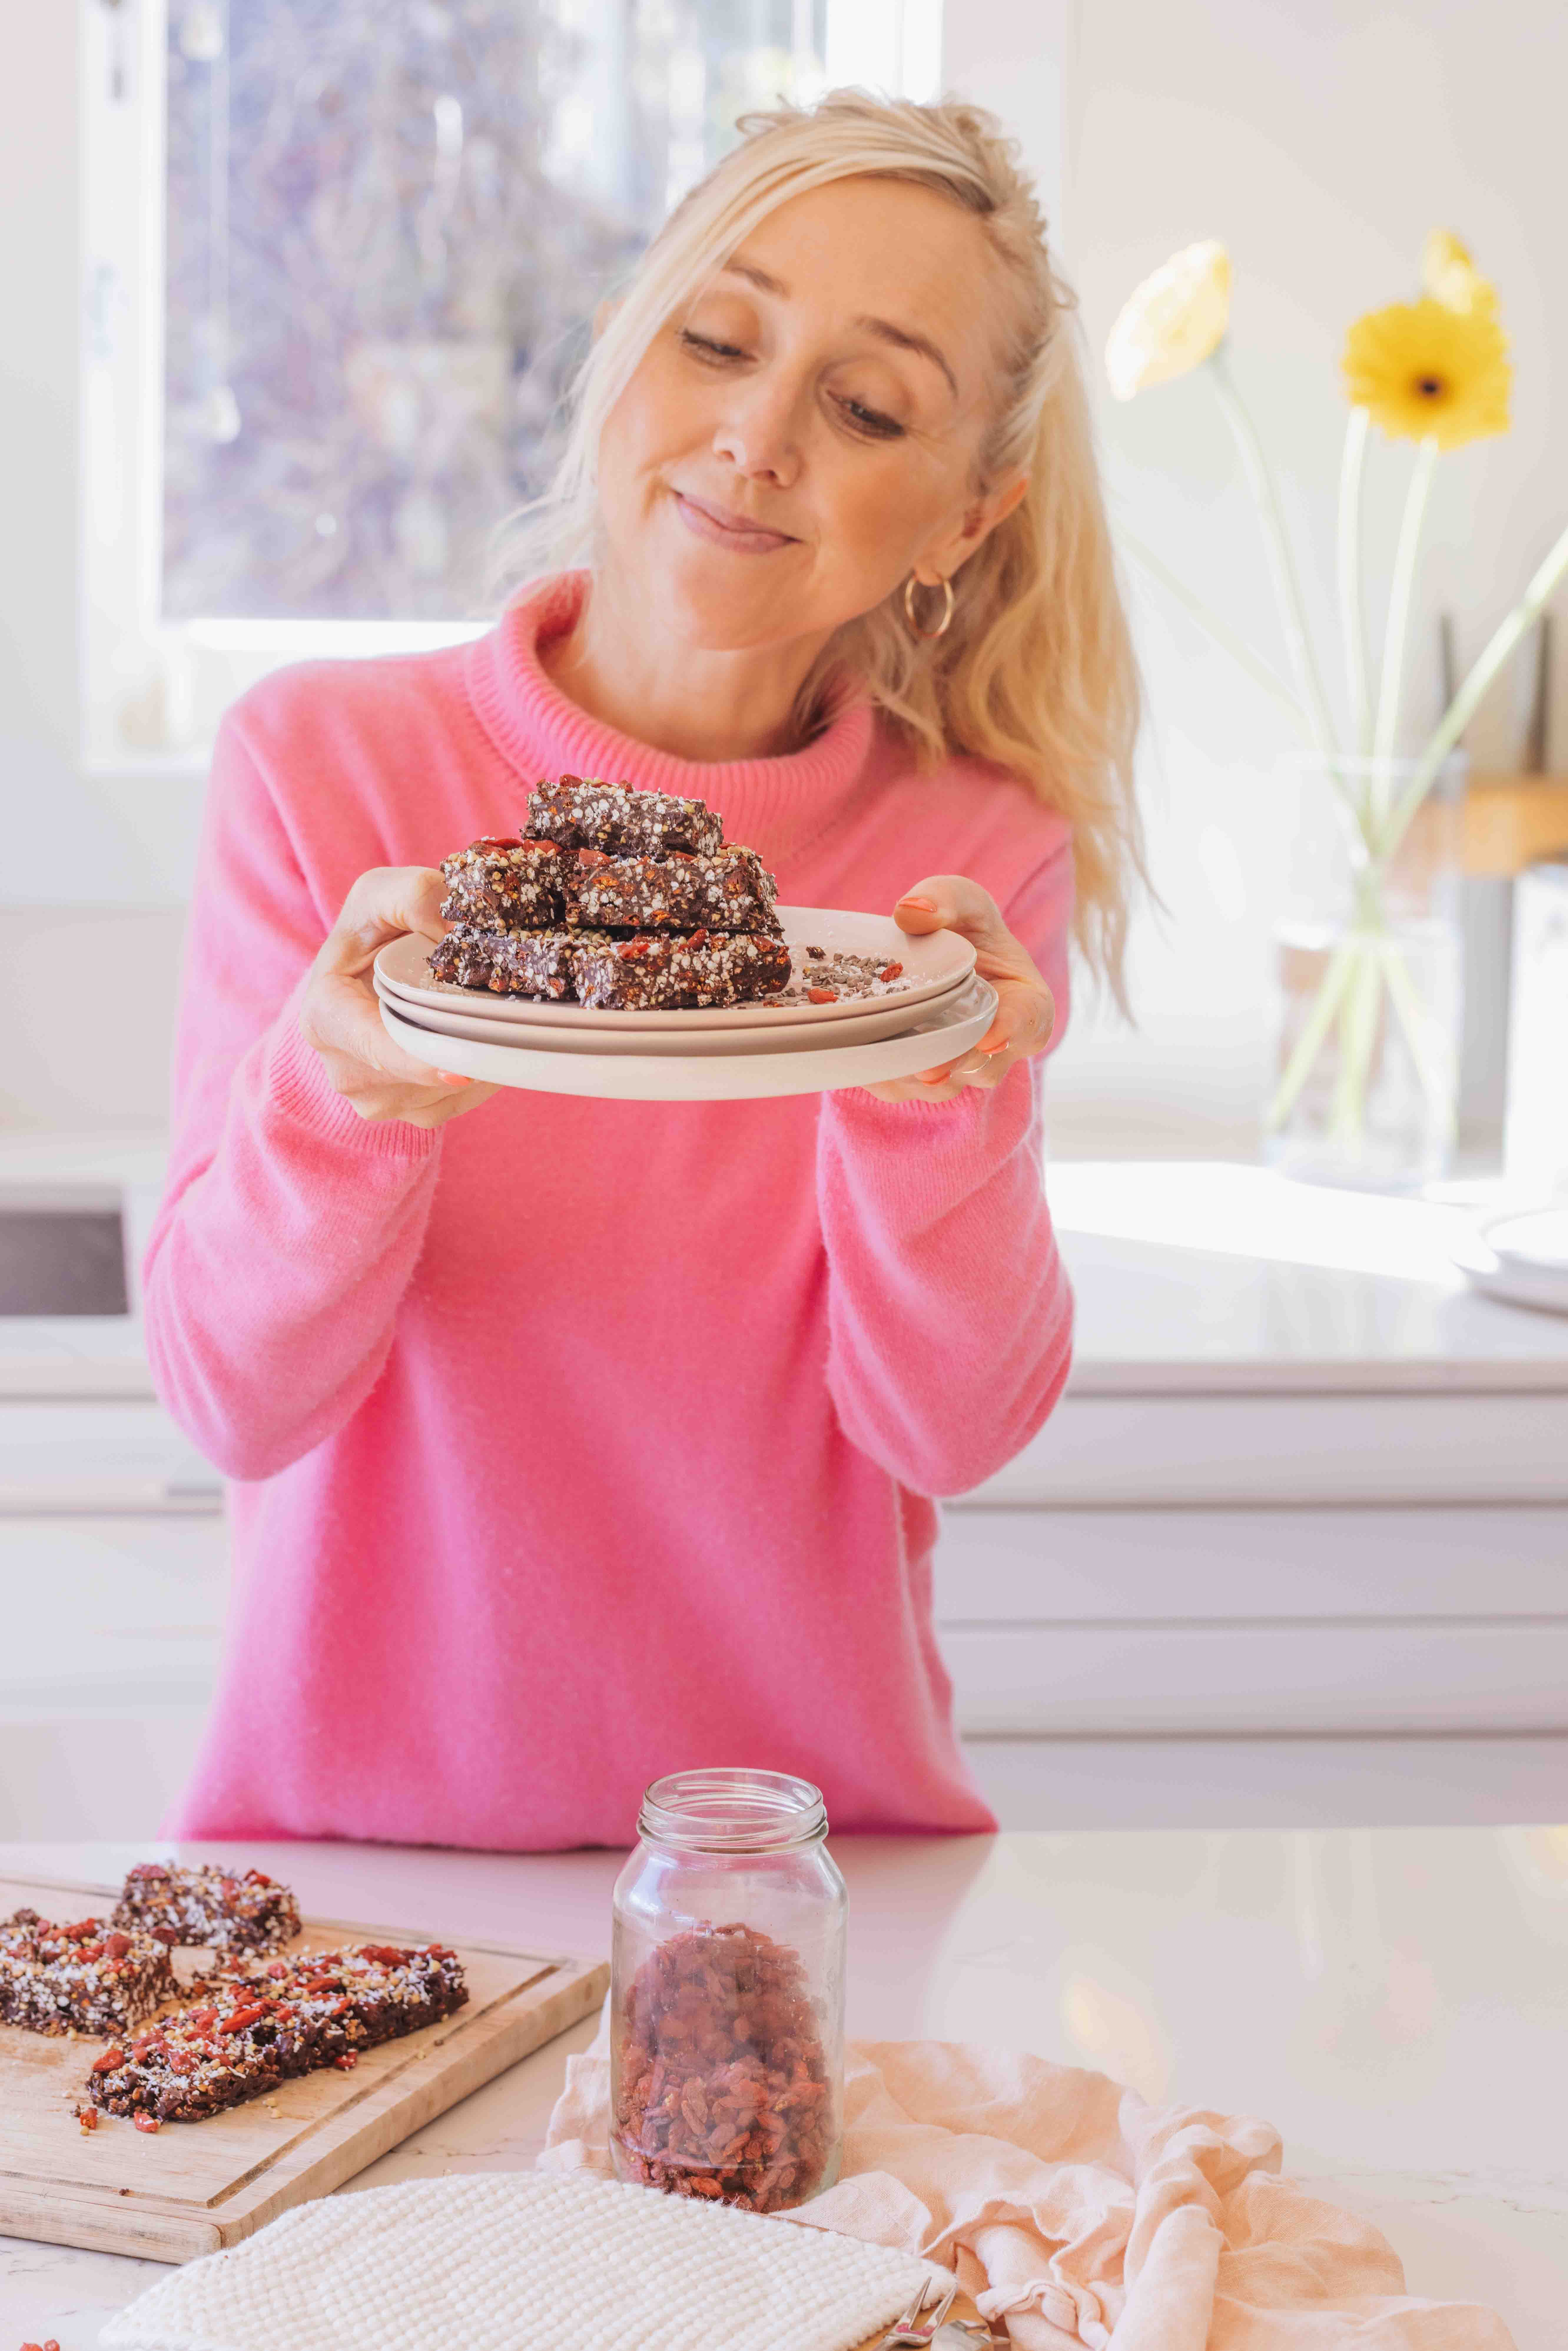 Buffy Ellen holding pink plates with chocolate coated goji berries, buckwheat and coconut crunch